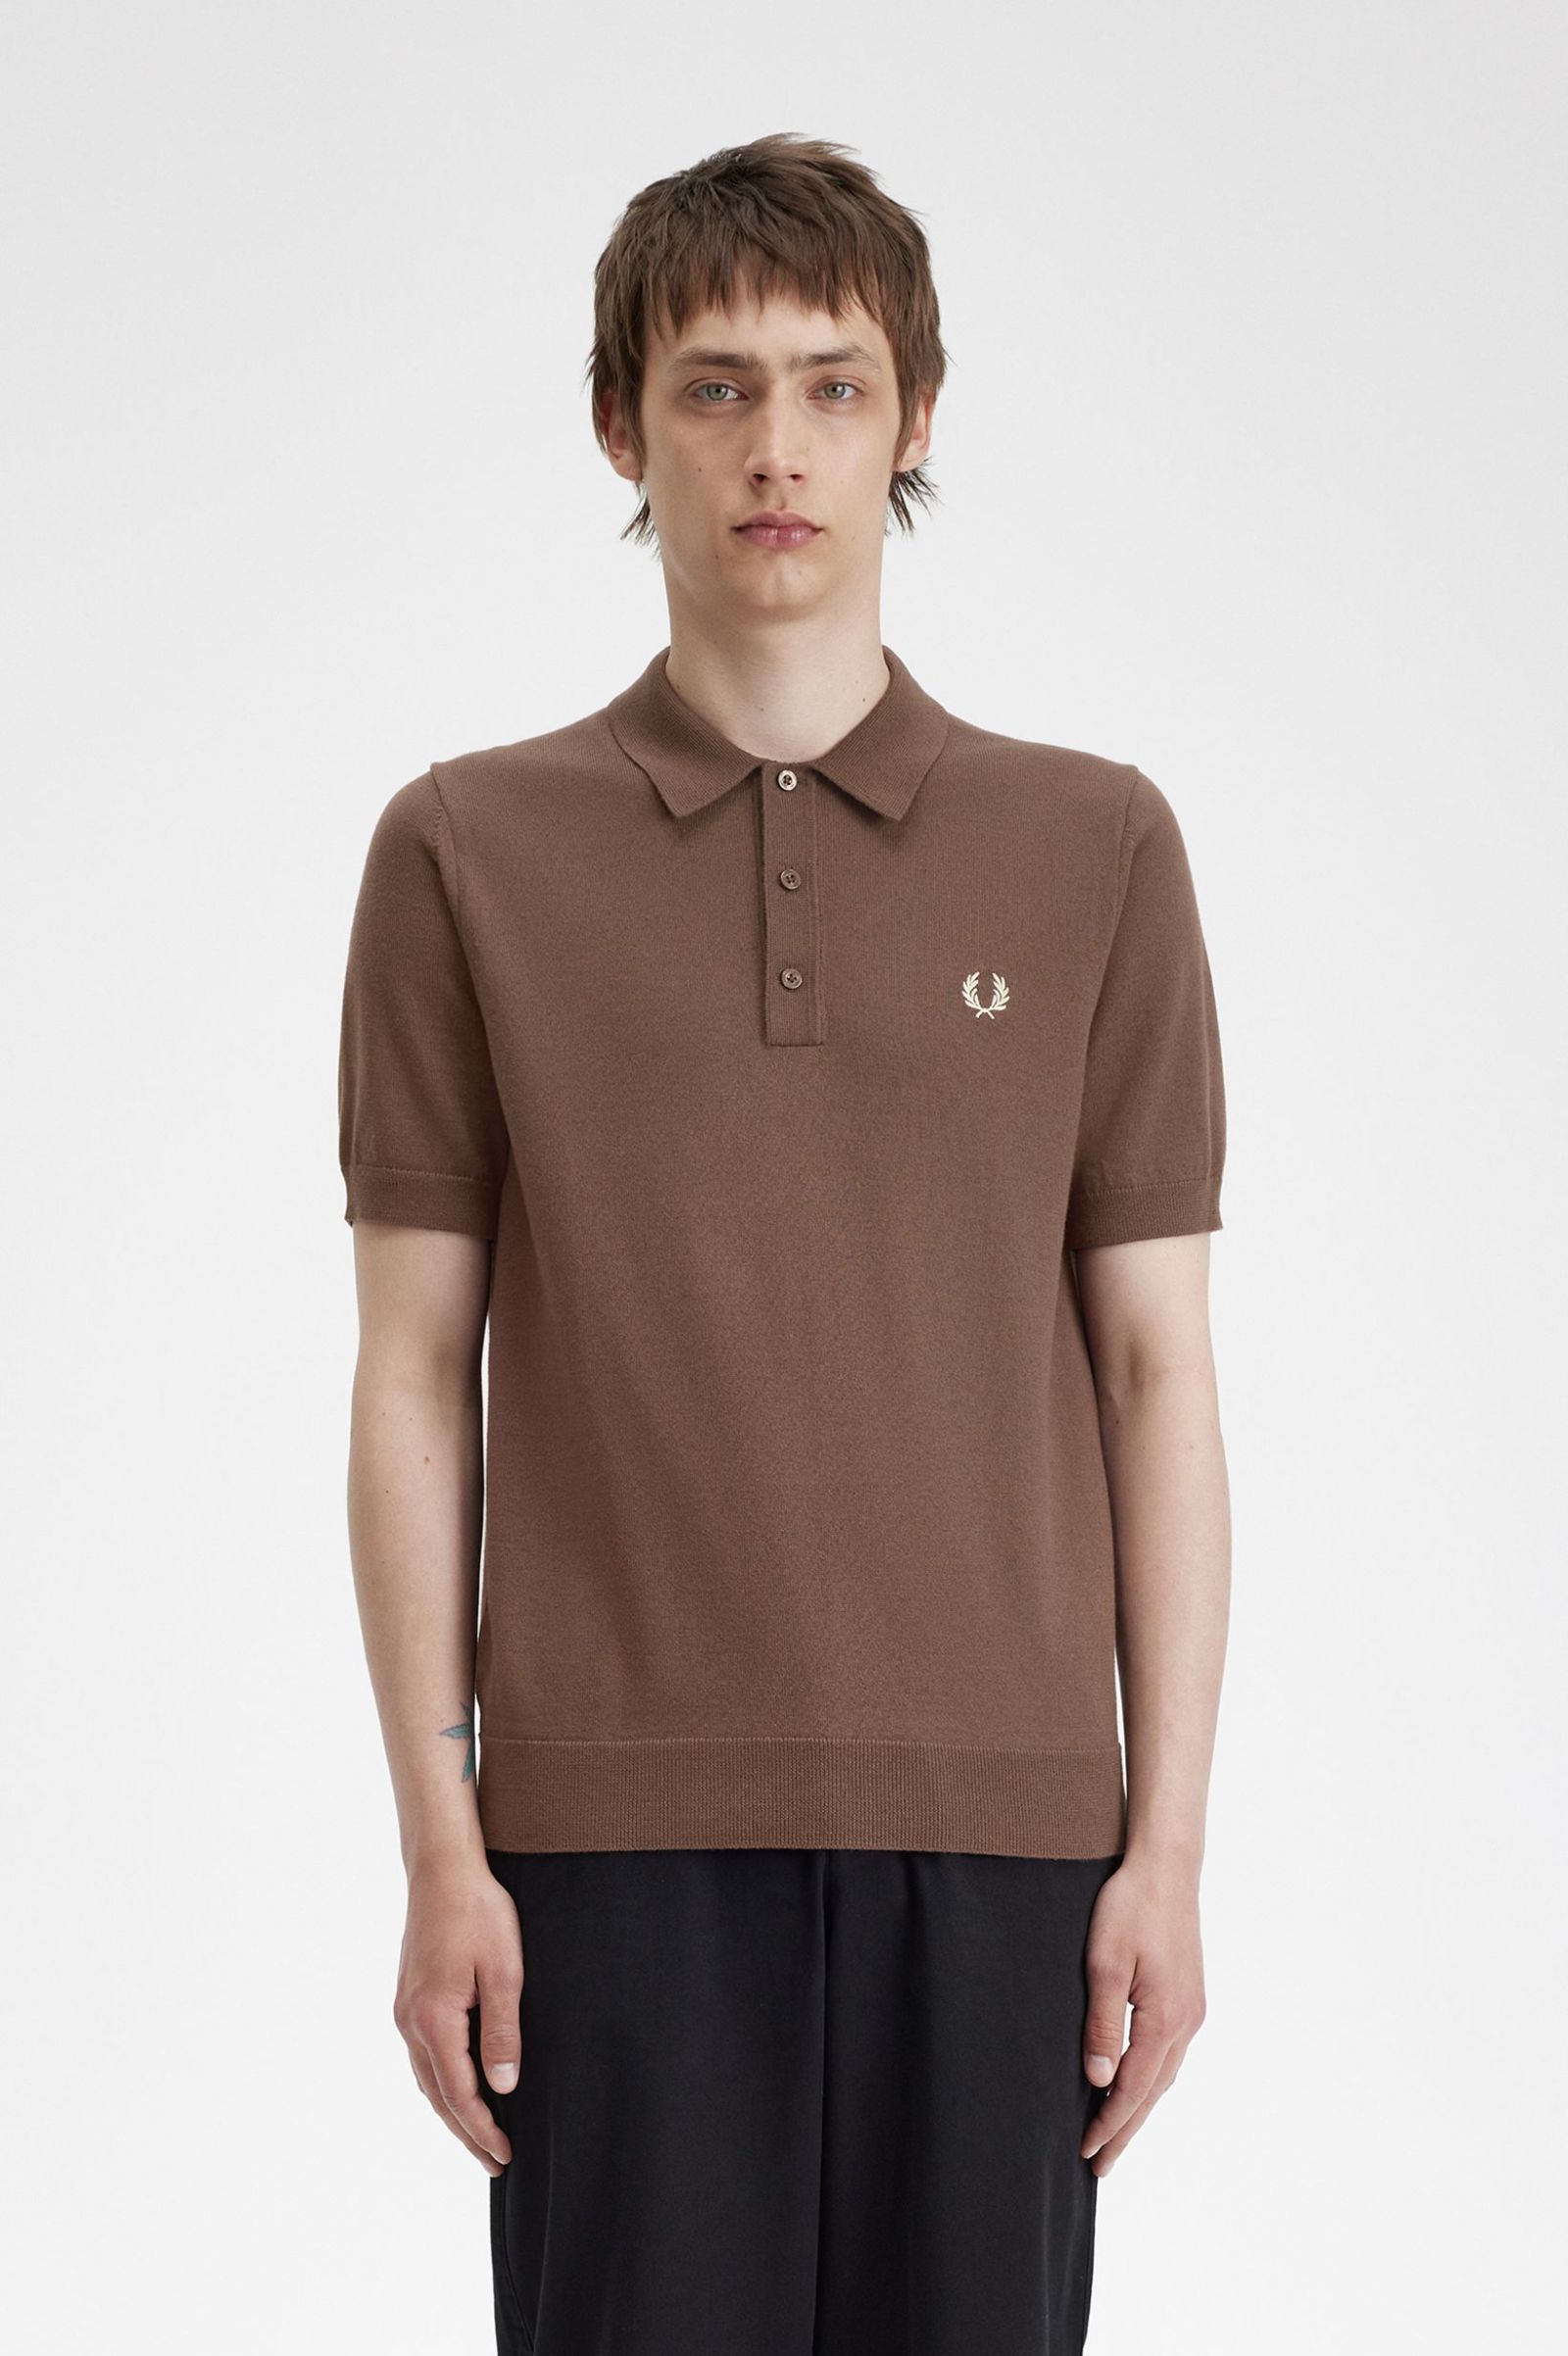 Fred Perry Classic Knitted Shirt in Carrington Brick